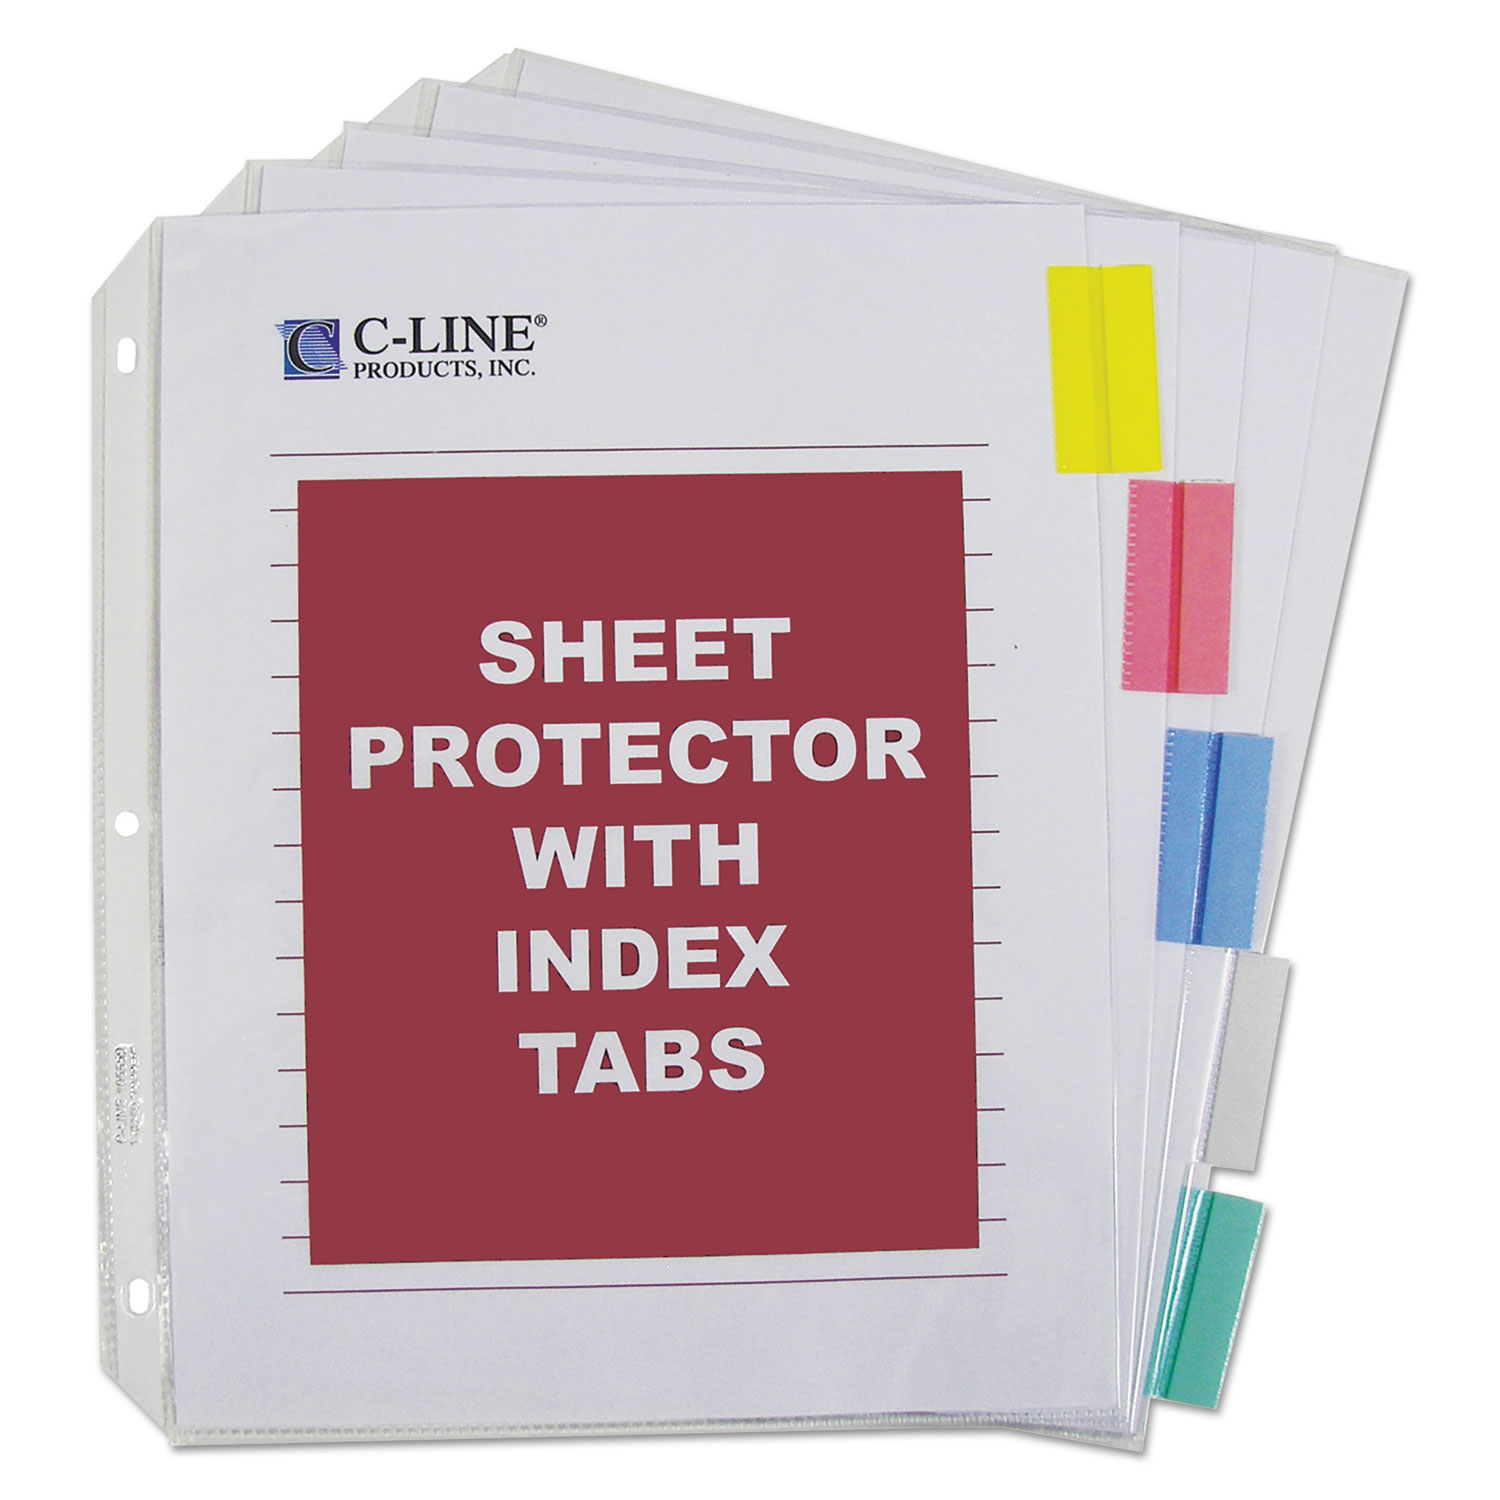 Sheet Protectors with Index Tabs, Assorted Color Tabs, 2, 11 x 8 1/2, 5/ST